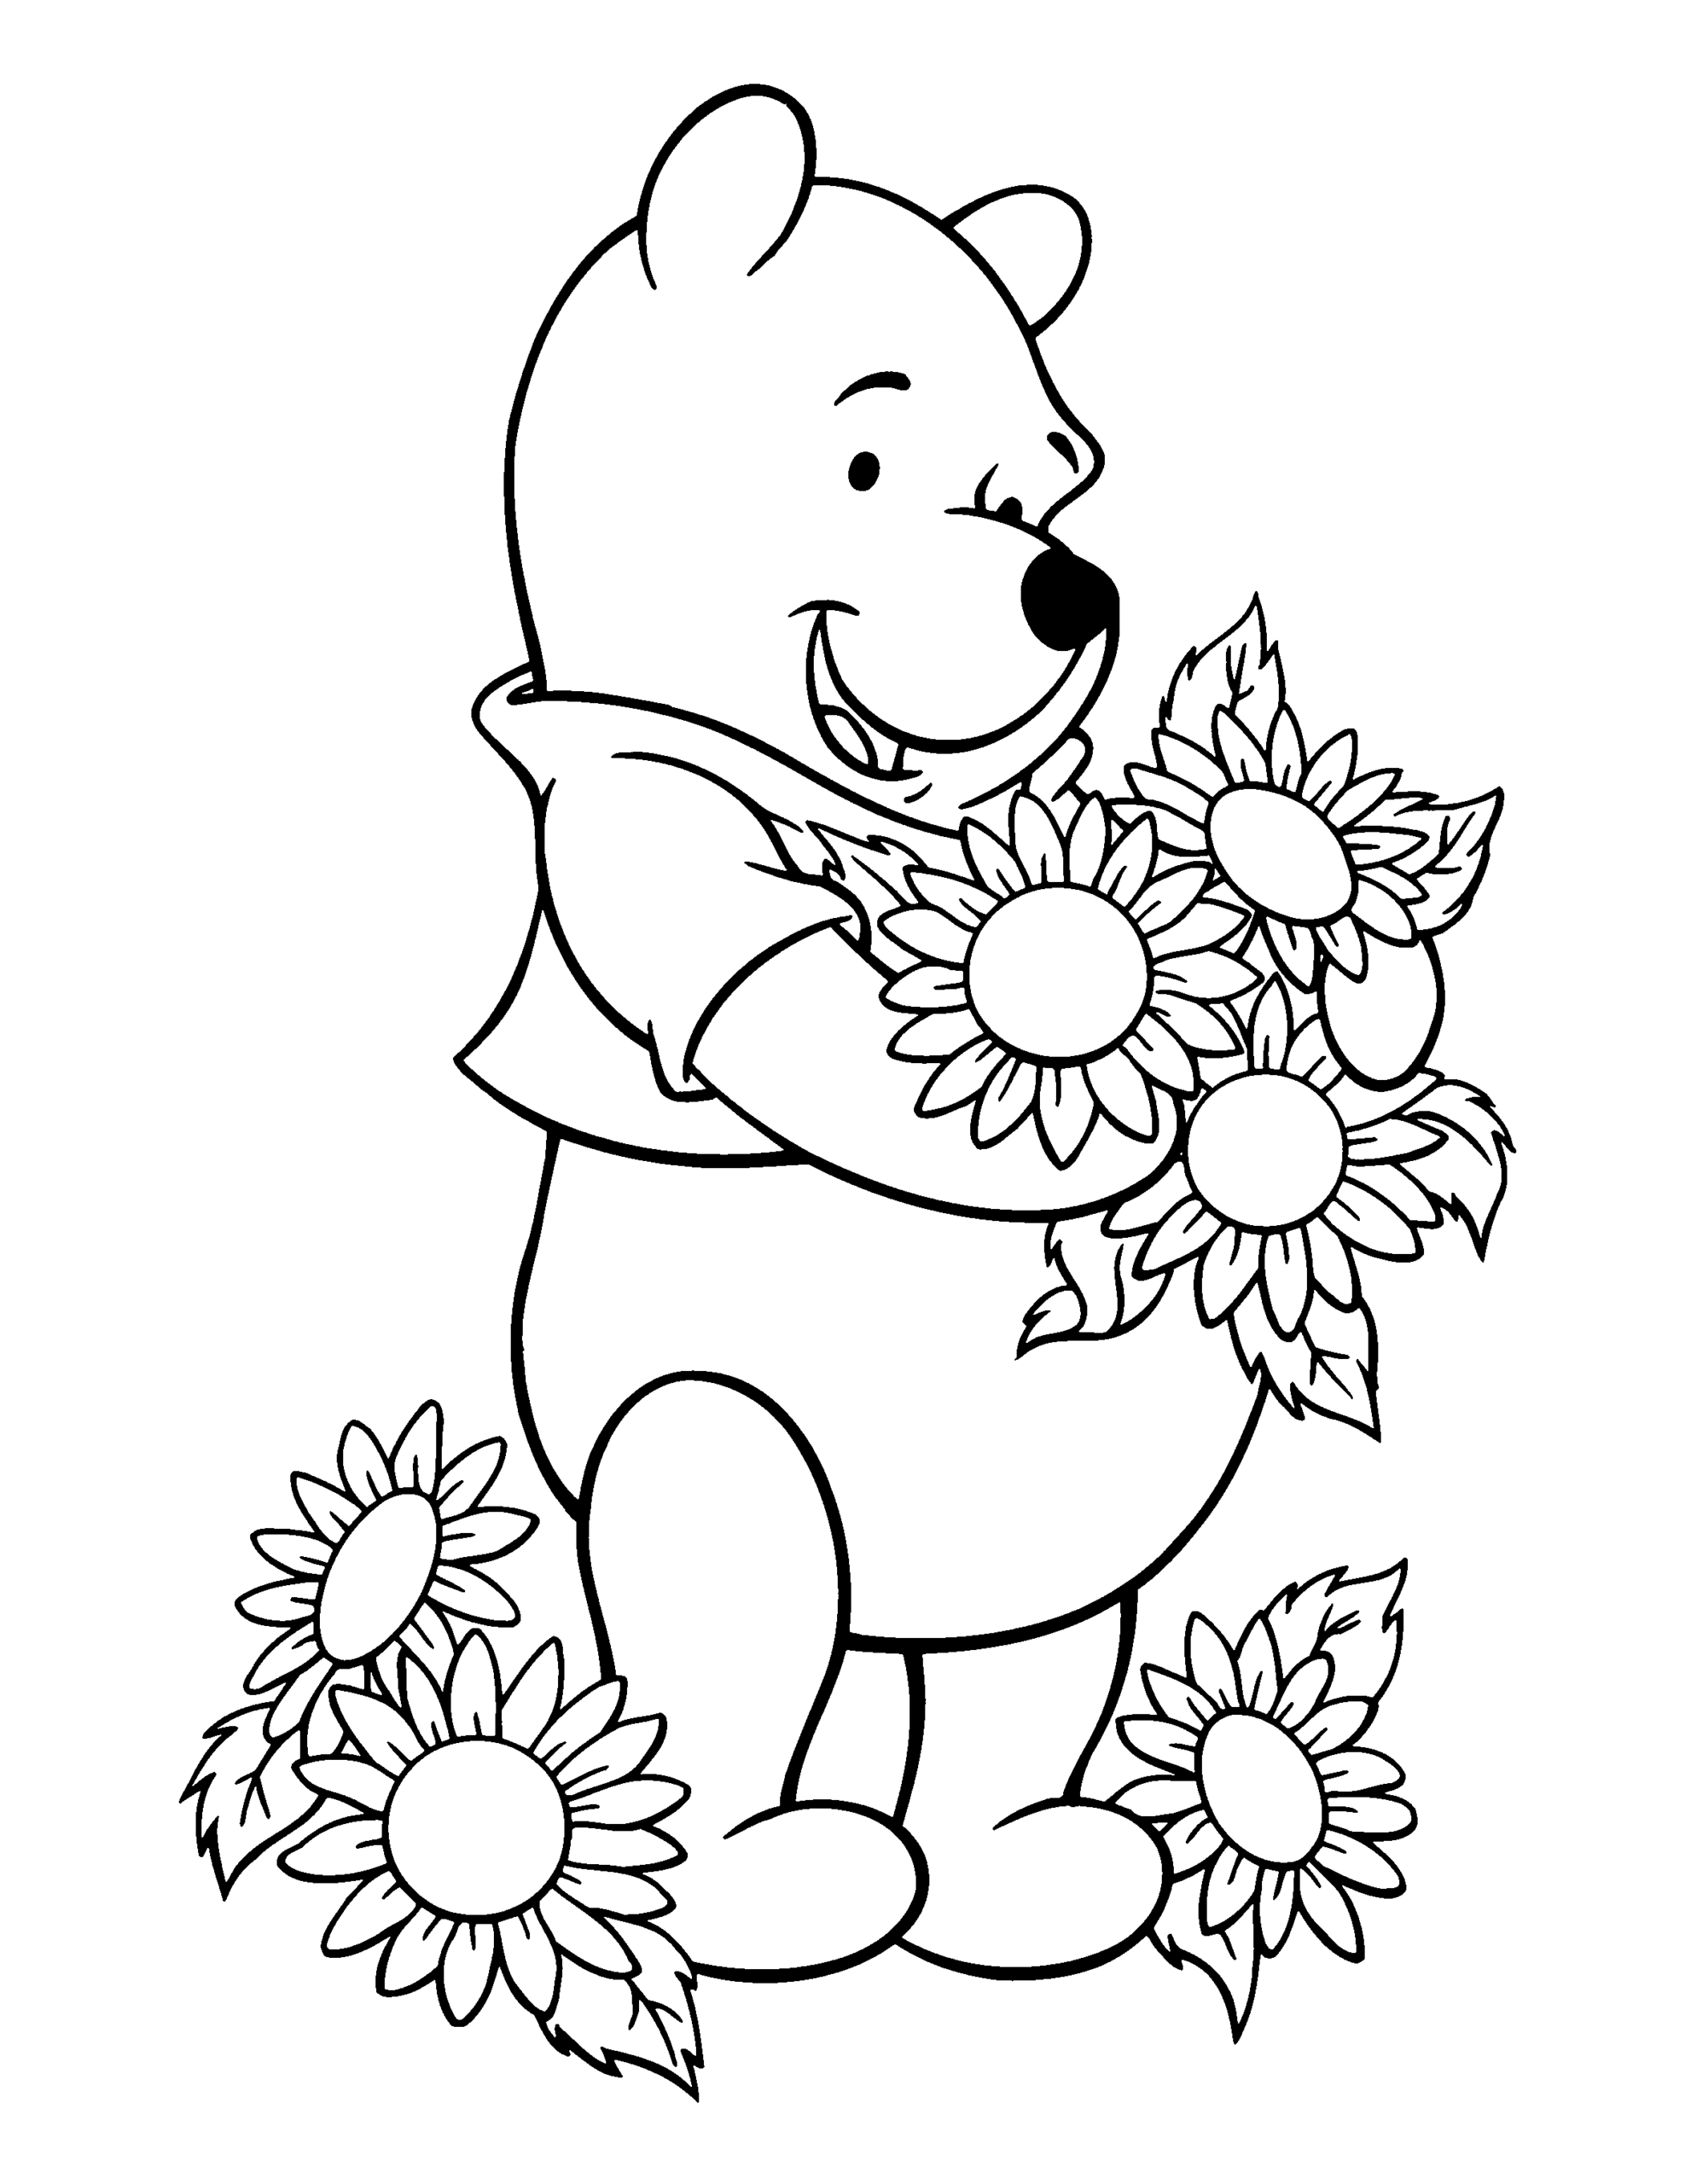 Winnie the Pooh Coloring Pages Cartoons winnie the pooh 116 Printable 2020 7096 Coloring4free